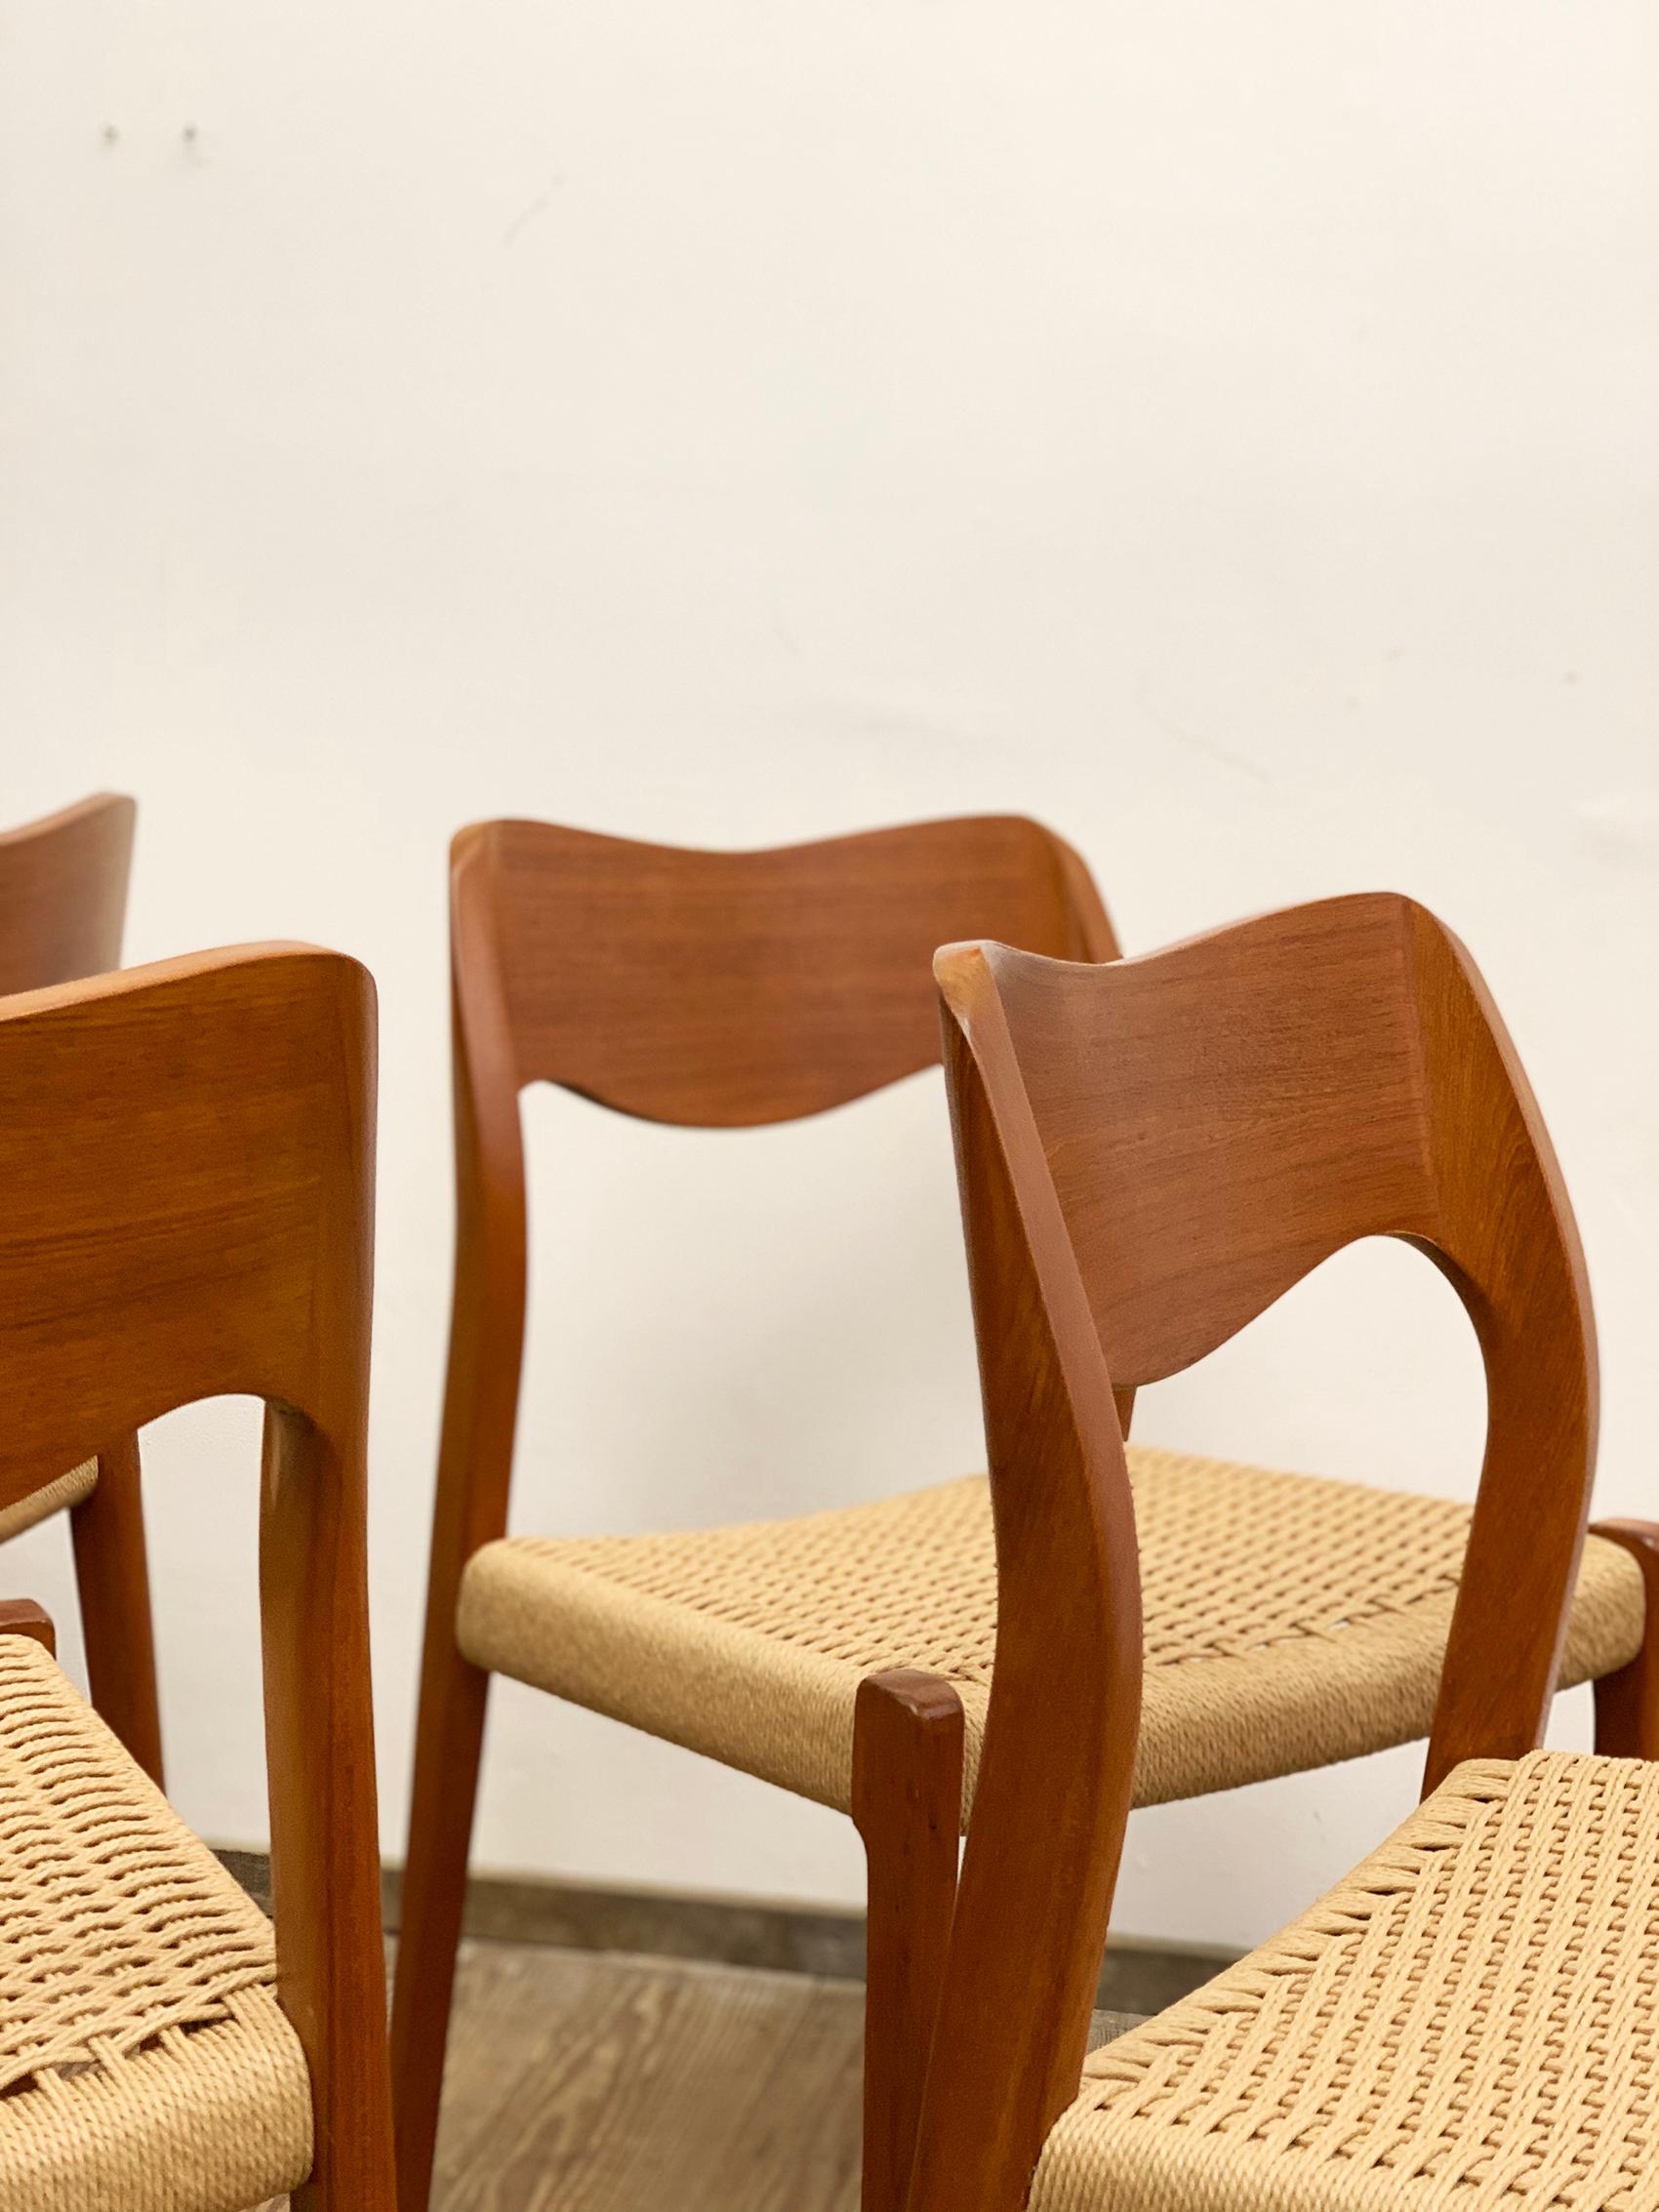 Mid-20th Century Mid-Century Teak Dining Chairs #71 by Niels O. Møller for J. L. Moller, Set of 4 For Sale